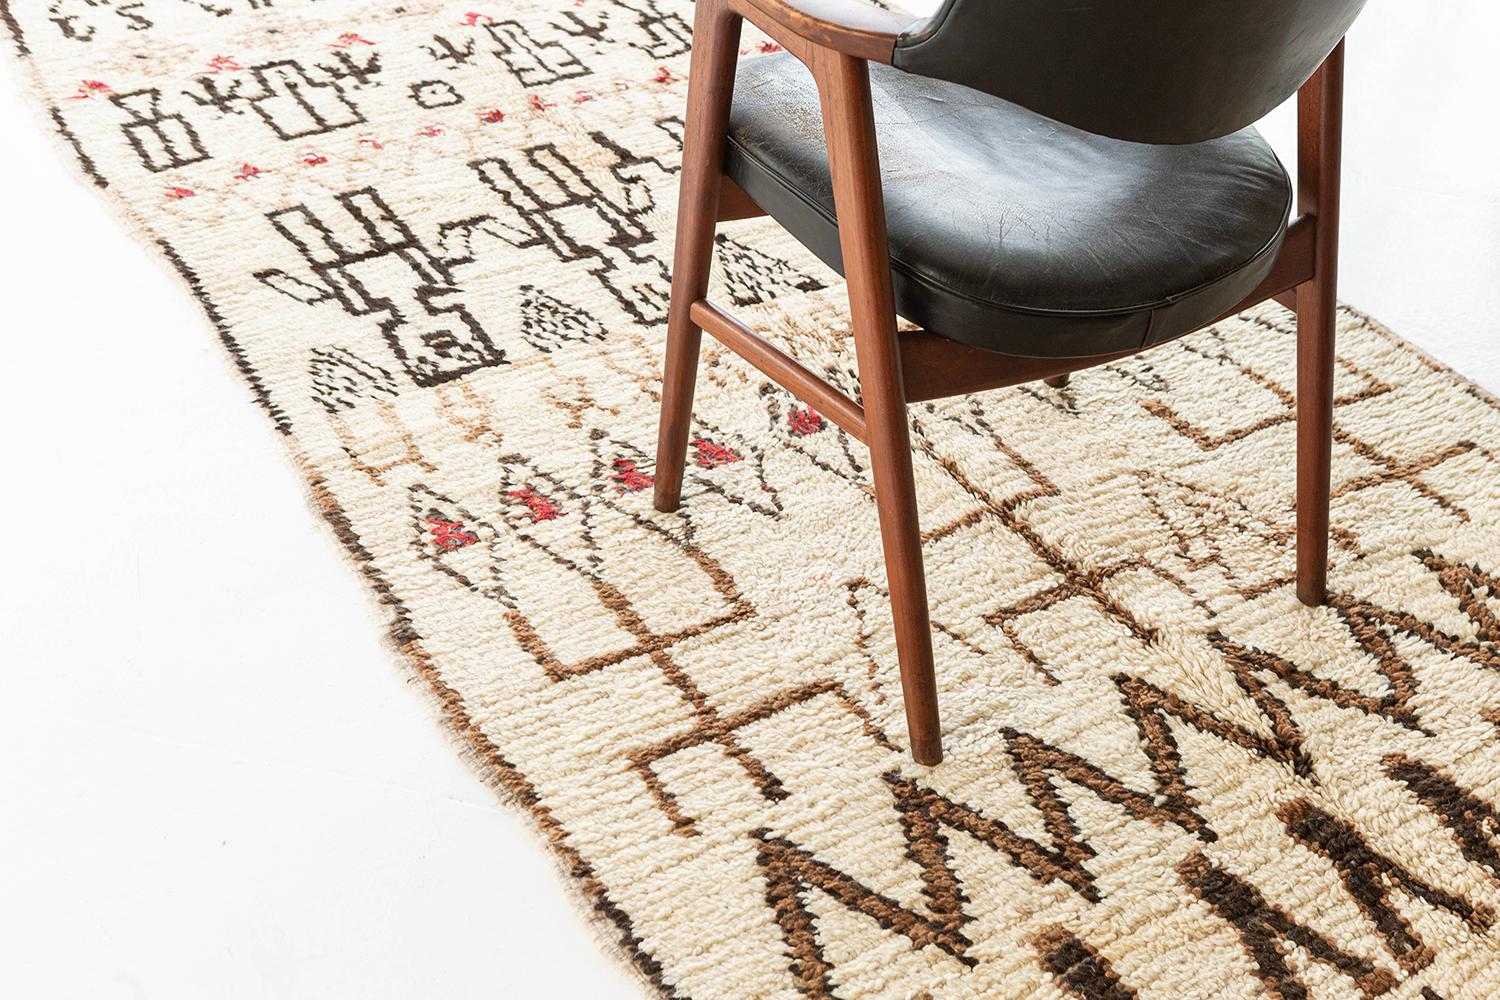 Ivory ground with deep brown, tan, and rose detailed imagery repeating in horizontal bands. Symbolic forms include human figures, numbers, and archaic motifs, all with the legibility of a text, open to interpretation. A unique vintage tribal rug